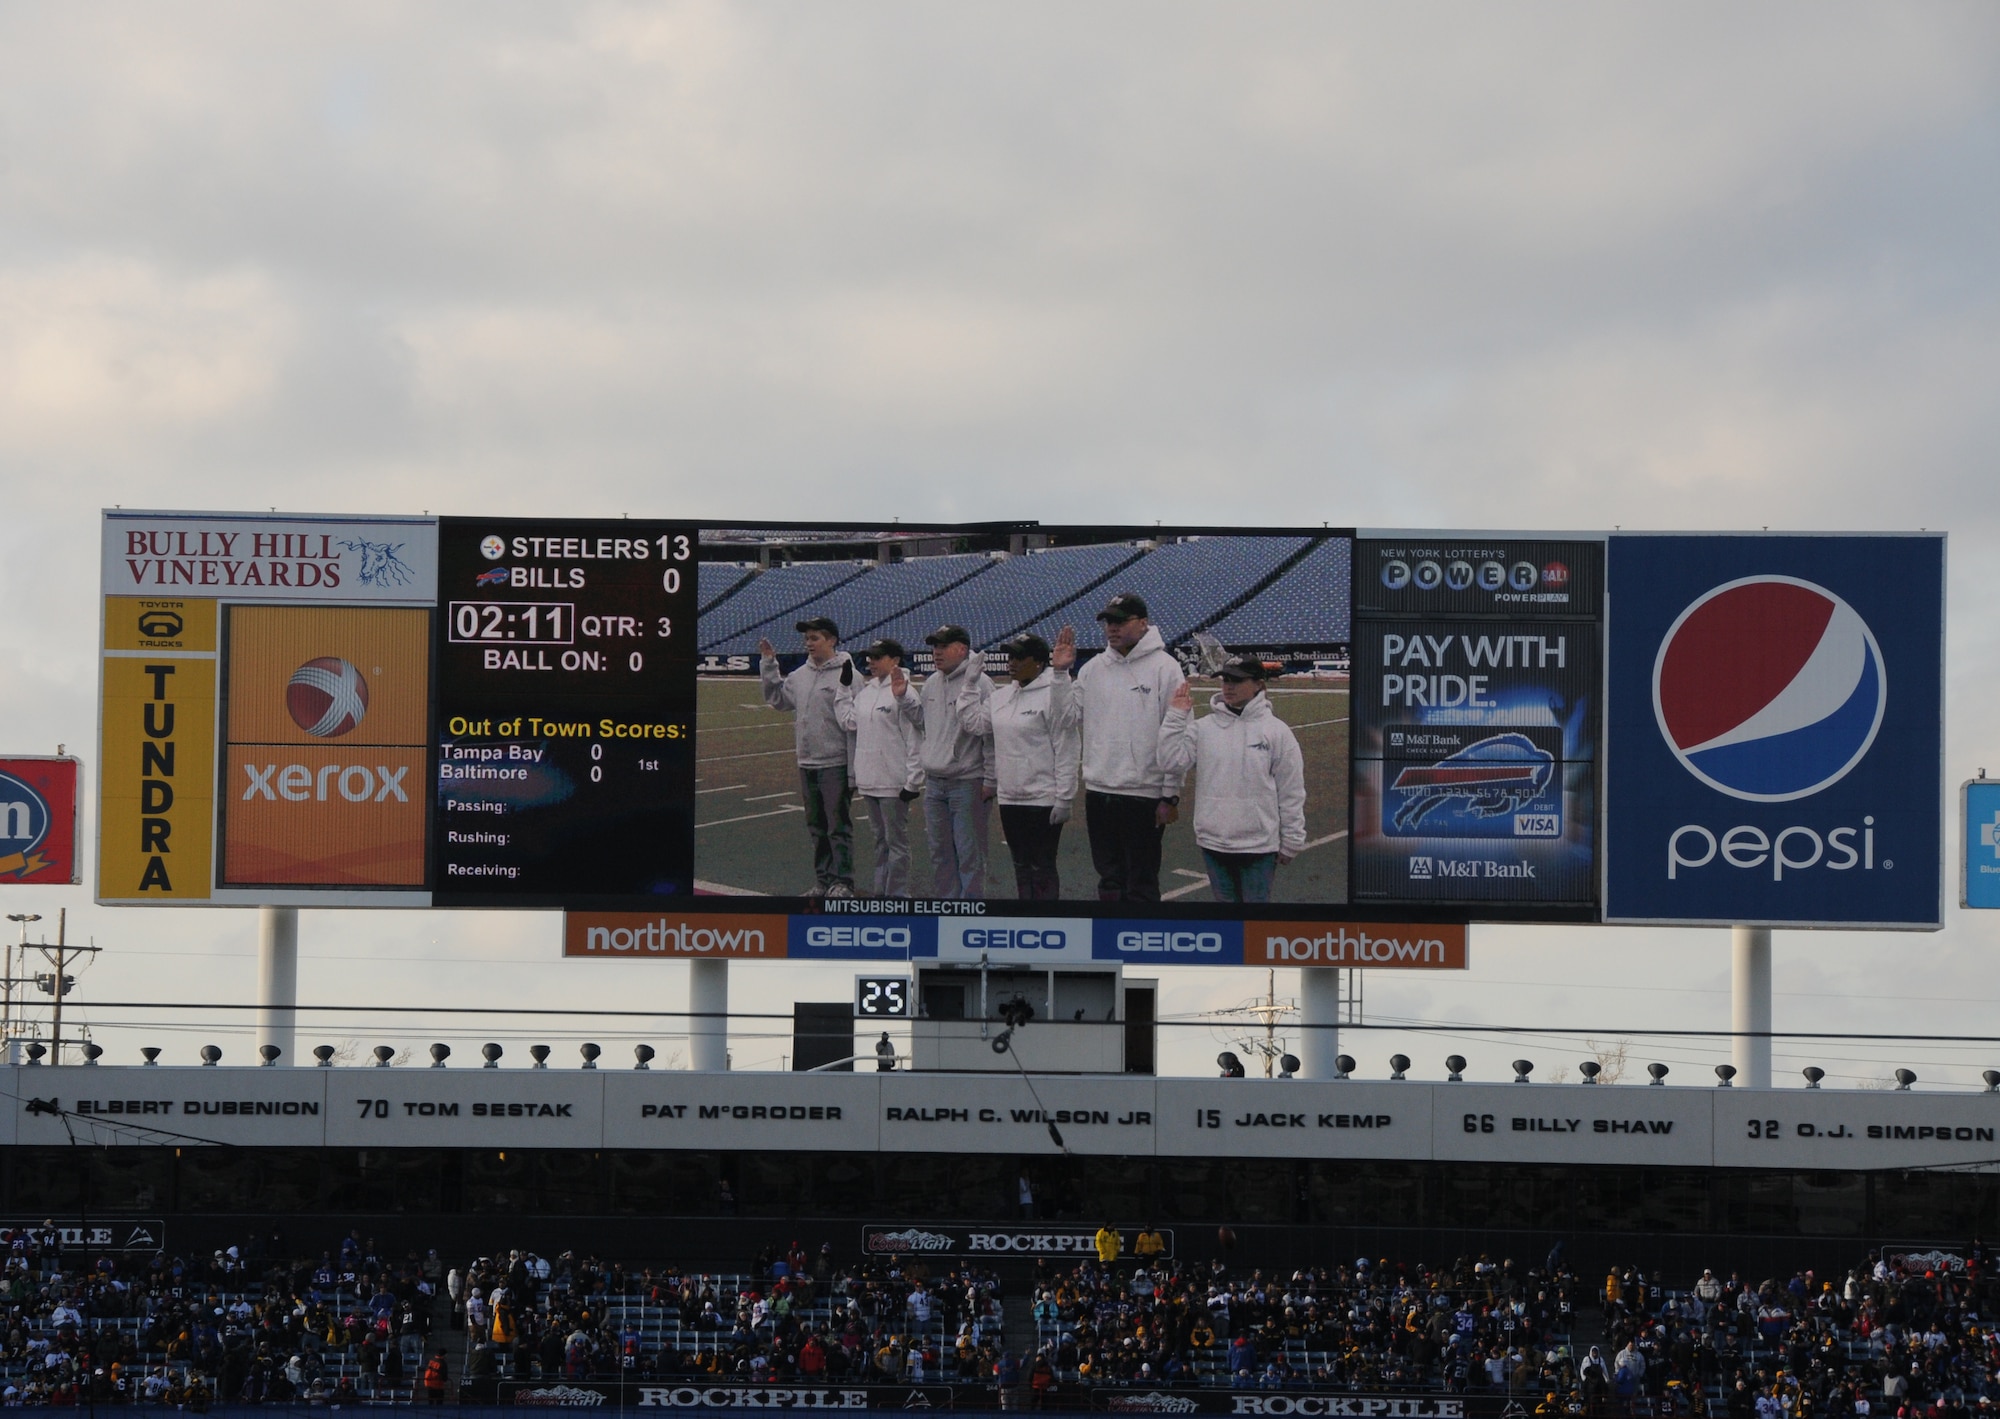 During a Buffalo Bills pregame ceremony held Sunday morning, six of the newest members of the New York Air National Guard's 107th Airlift Wing took the Oath of Enlistment. The ceremony was played during halftime on the Jumbotron for the fans to see.  Lt. Col. James Hoch swears in from left to right Airmen 1st class Daniel Tremblett, Cara Sturdivant, Keith McArthur, Christina Swanson, Joshua Velez and Joanna Vail.  (U.S. Air Force photo/Staff Sgt. Peter Dean)